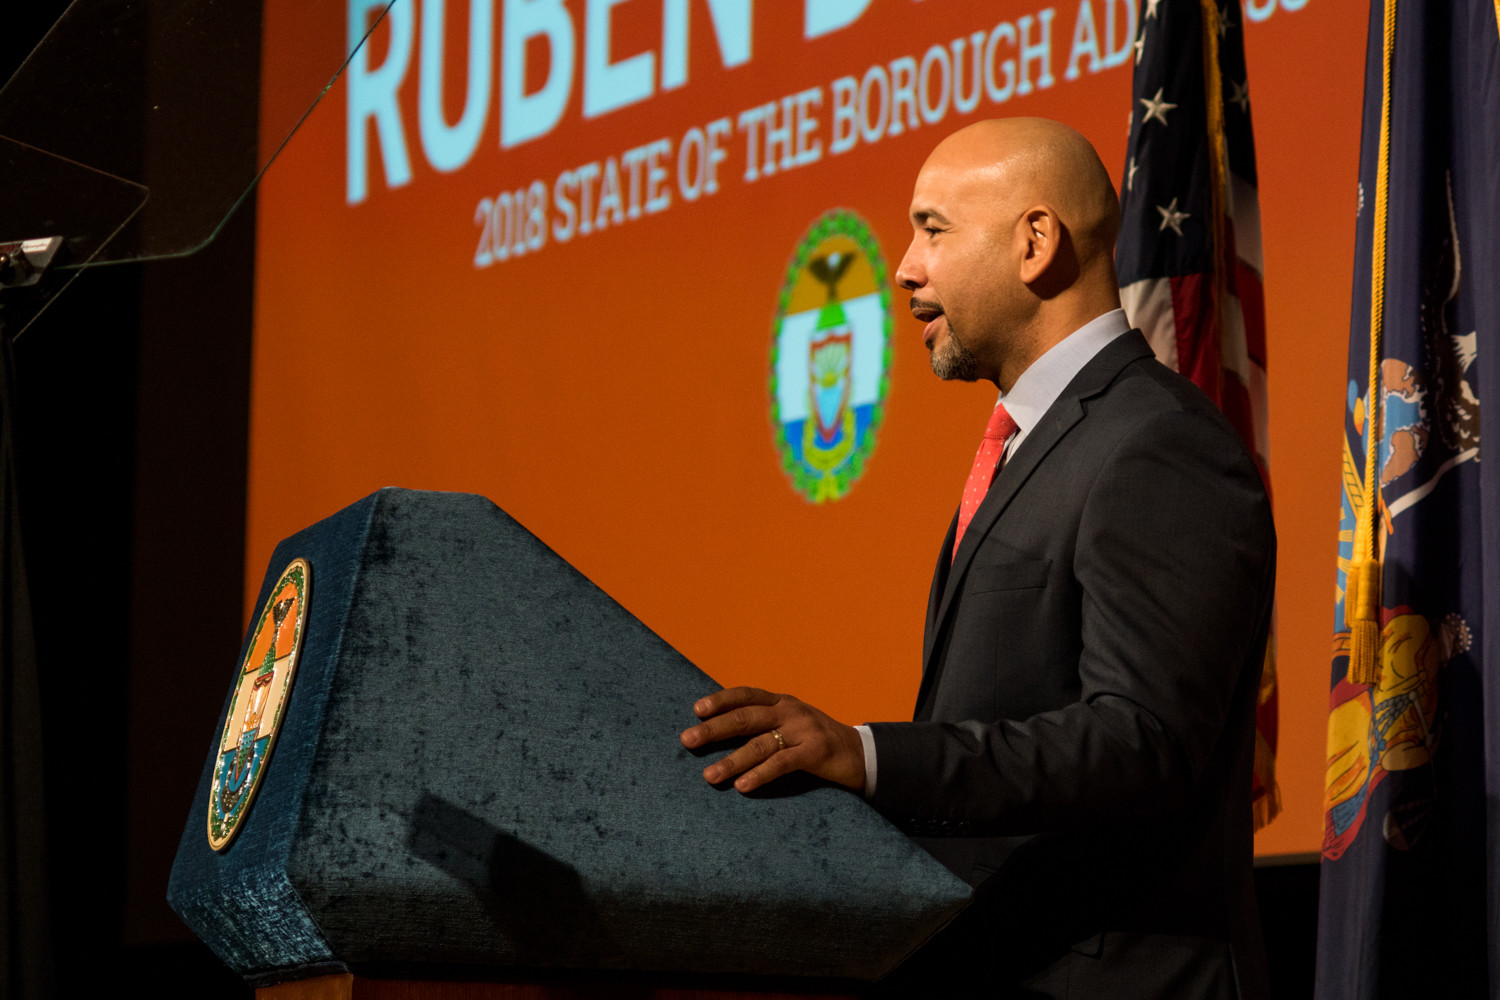 Bronx borough president Ruben Diaz Jr., talks about the strides the borough has made in the last year. One bright spot is the growing economy, with unemployment cut in half, plummeting to 5.5 percent, and more than 110,000 people finding jobs since Diaz took office in 2009.